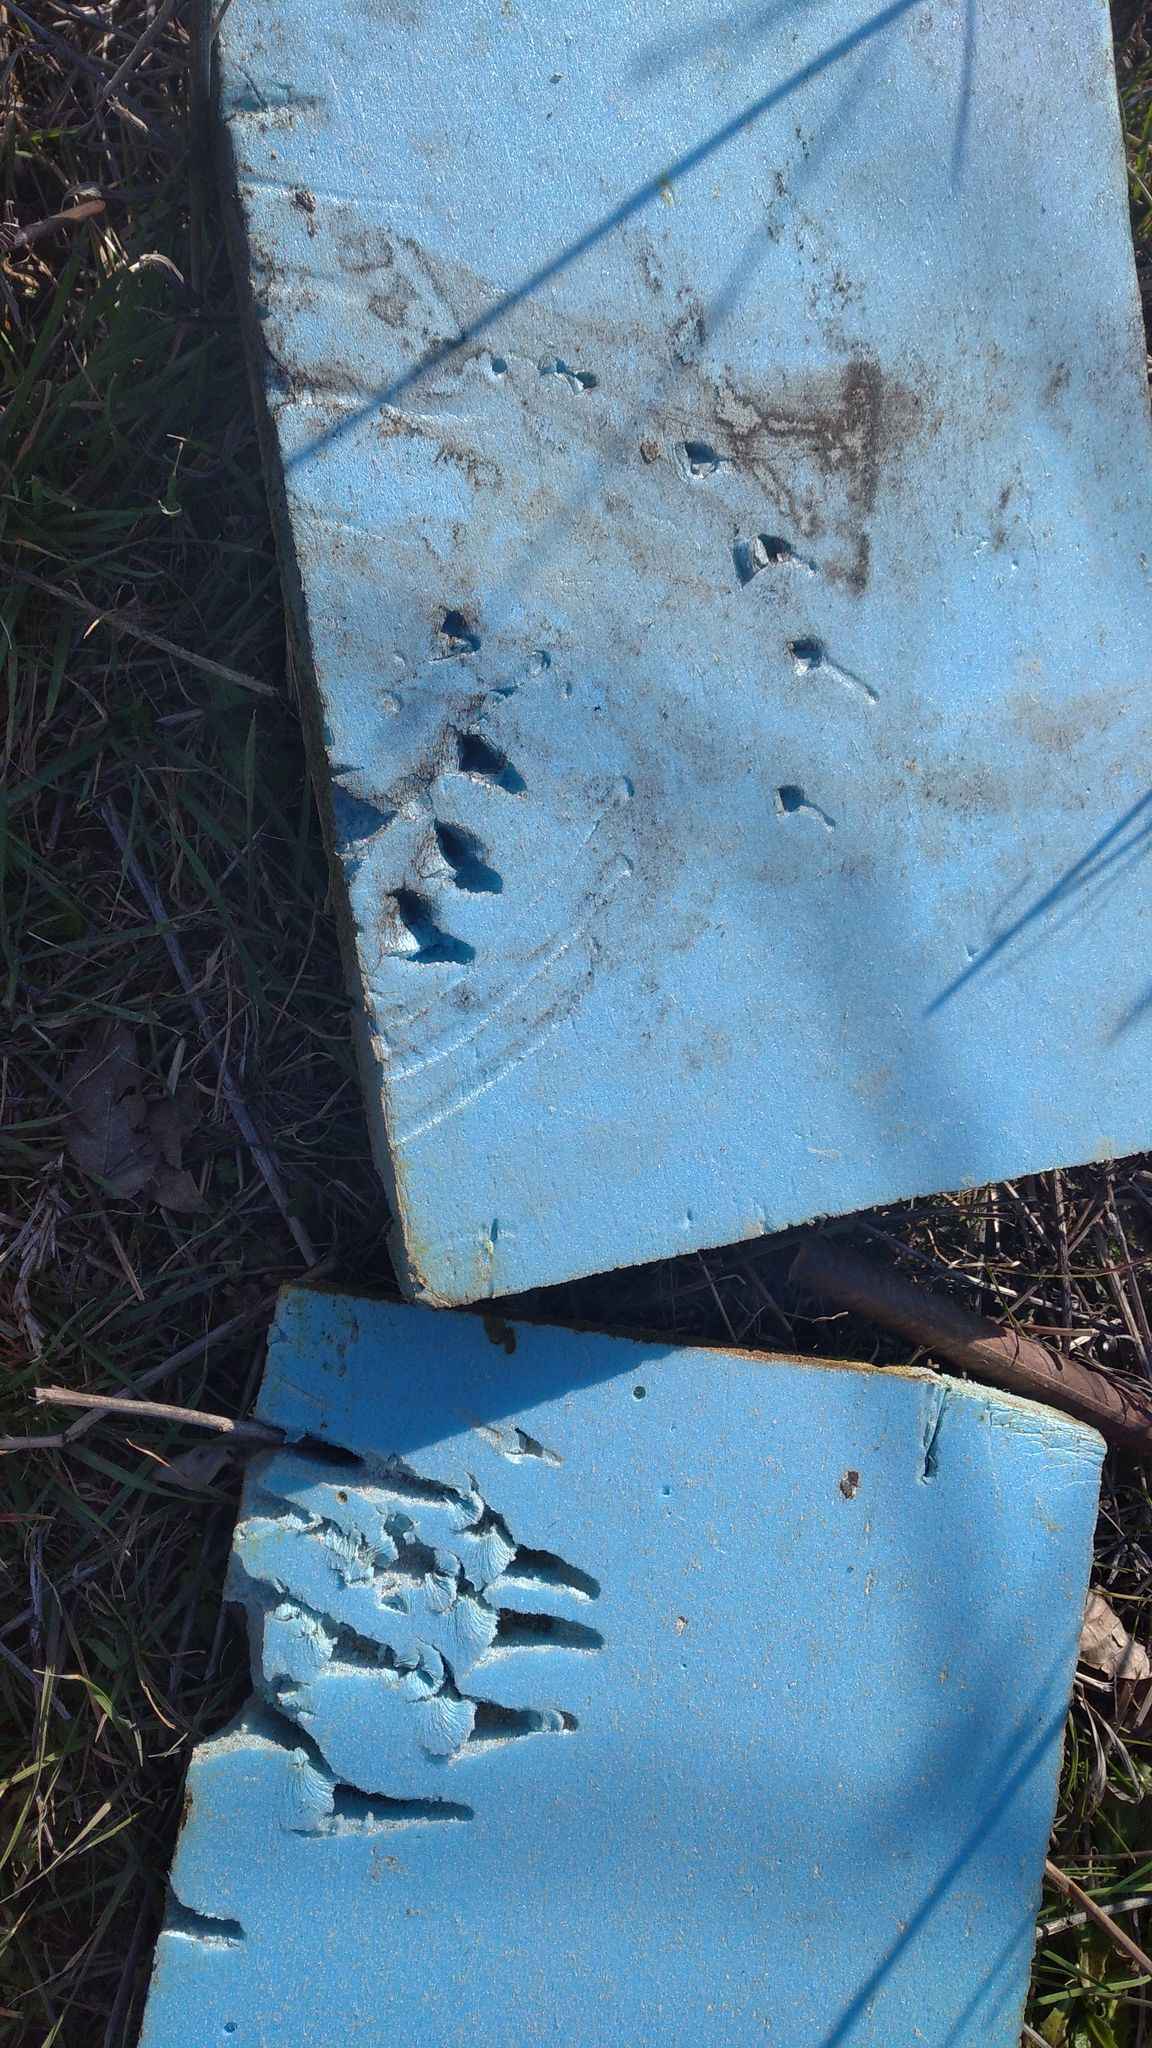 claw marks left by the bear